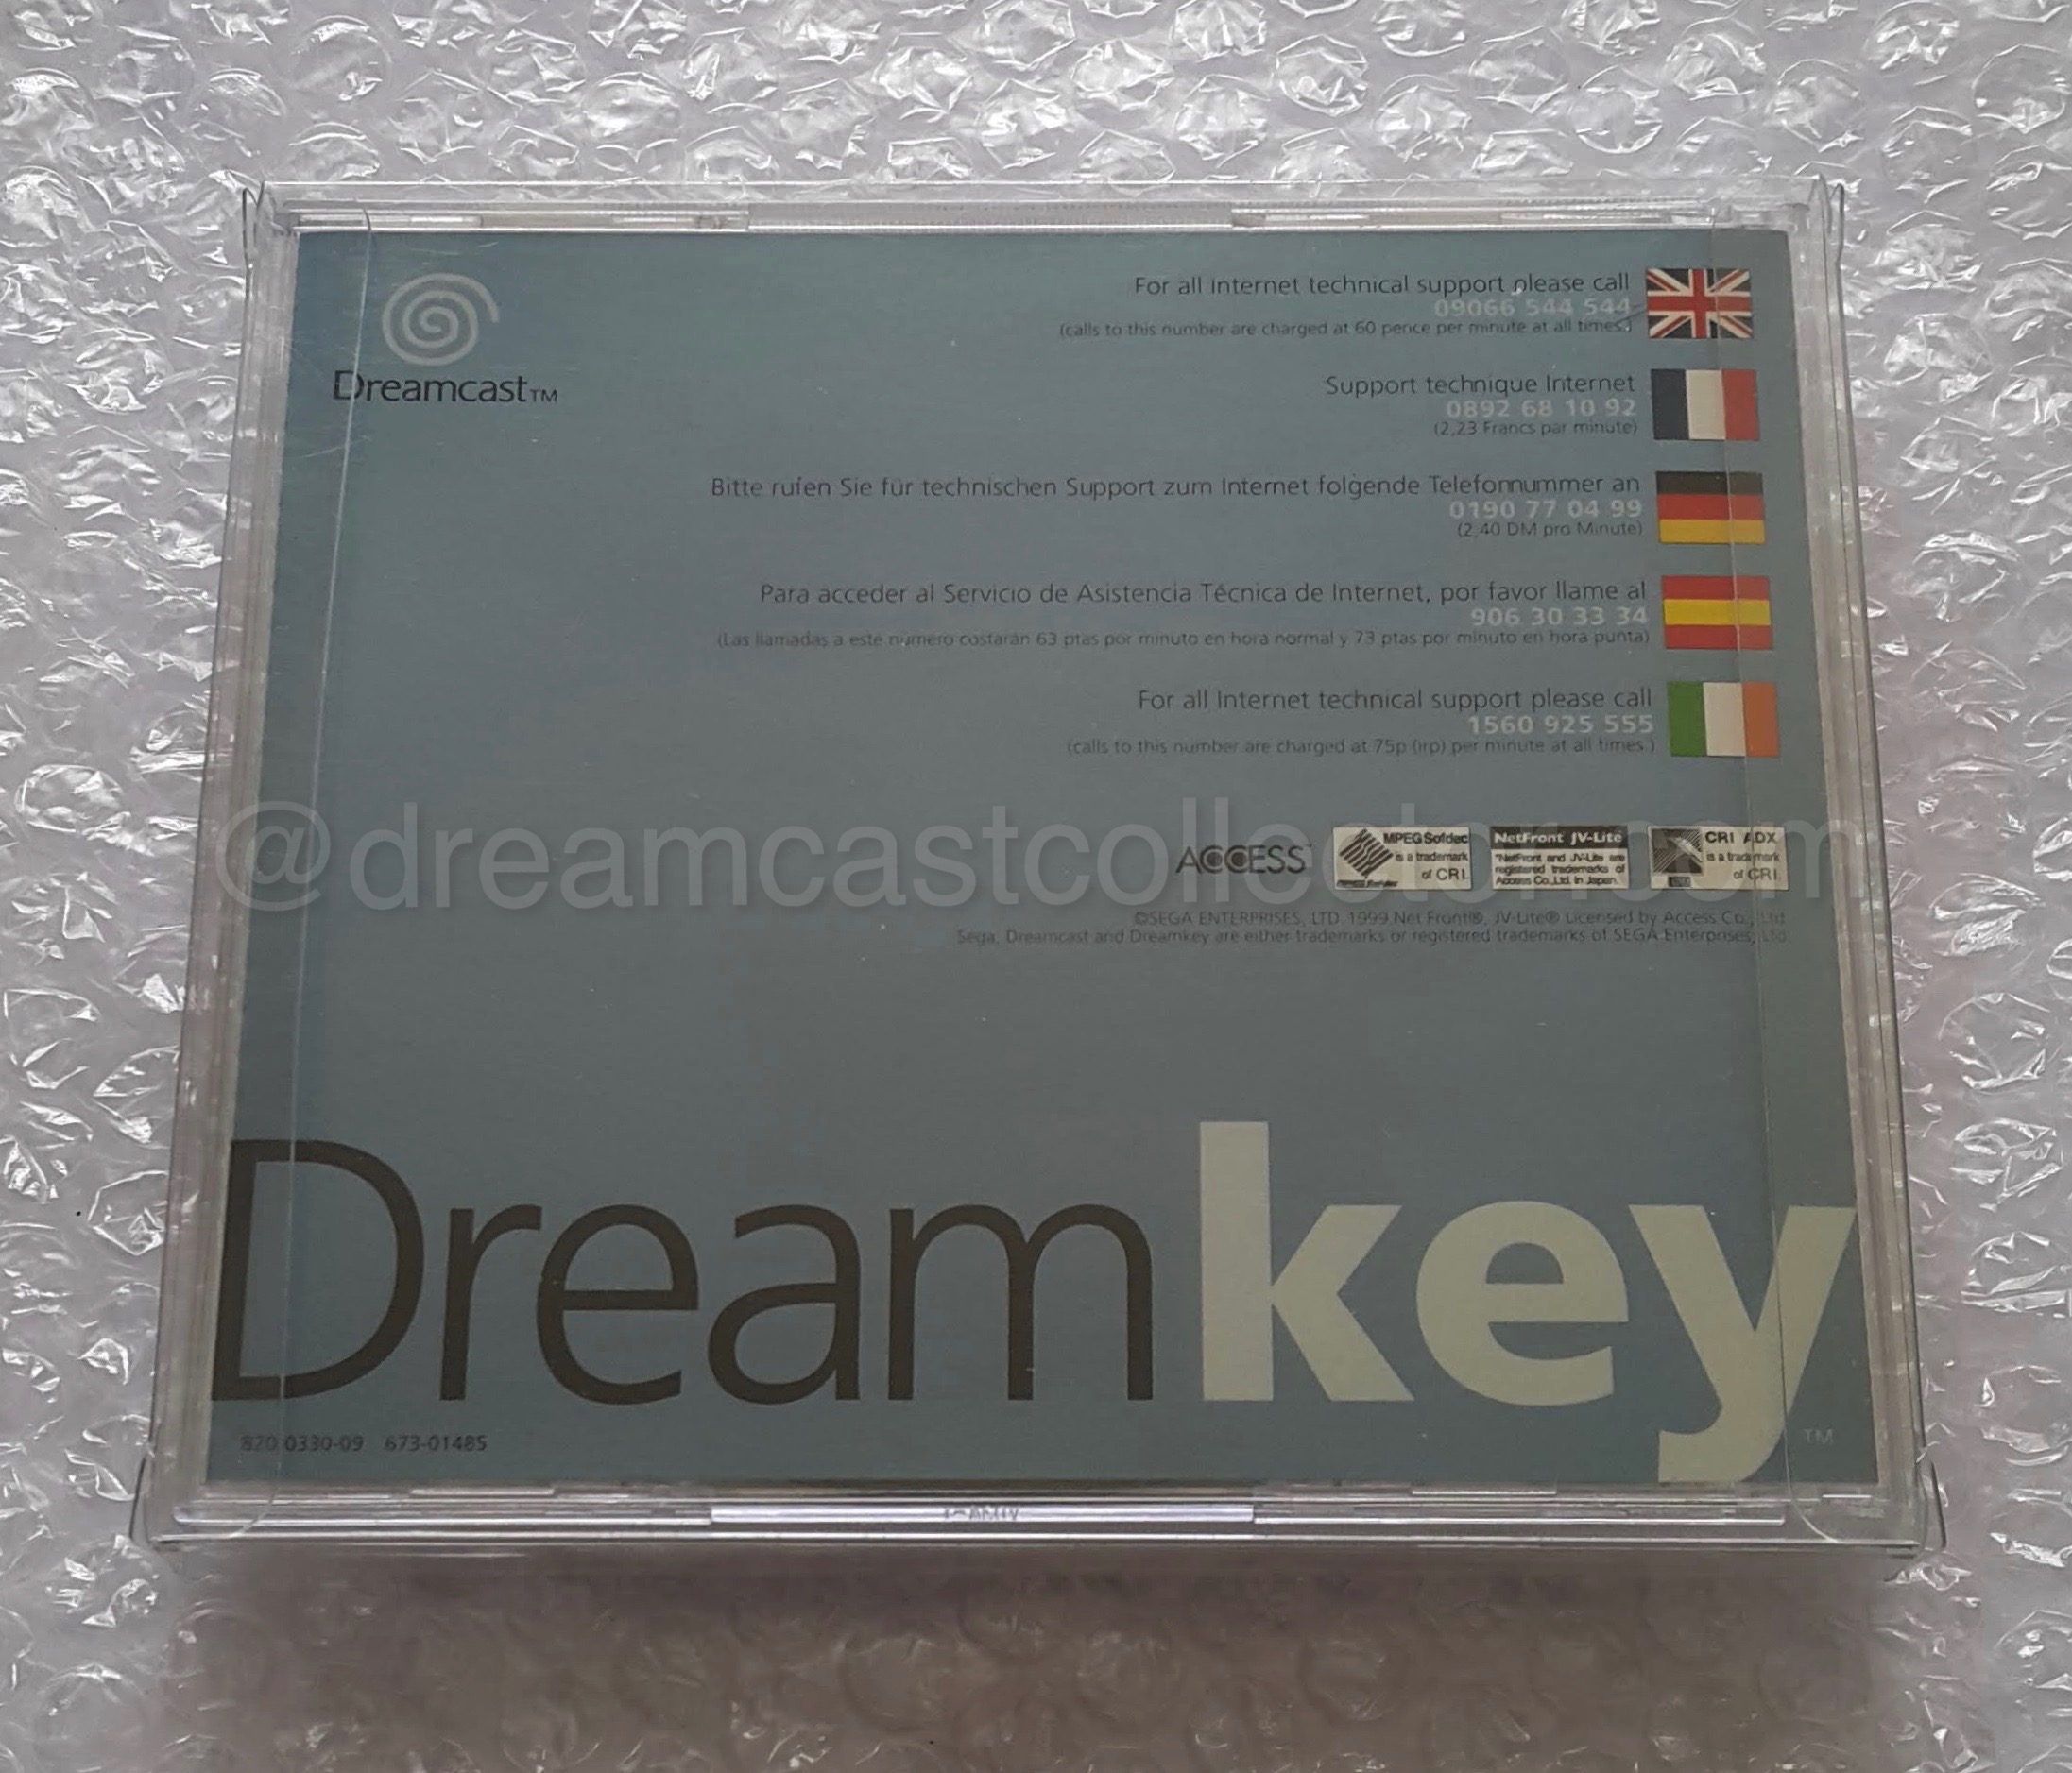 With the front cover being the same as the general release, unsurprisingly, the rear insert continues the metallic blue of the previous French DreamKey. This design is quite strange as if SEGA wanted the French DreamKey Version 1. 5 to be easily identifiable from the generic European iteration the front cover would’ve made more sense to have in a different colour. Apart from the change from white to metallic blue, all the other information is the same as the previously documented version of the browser.